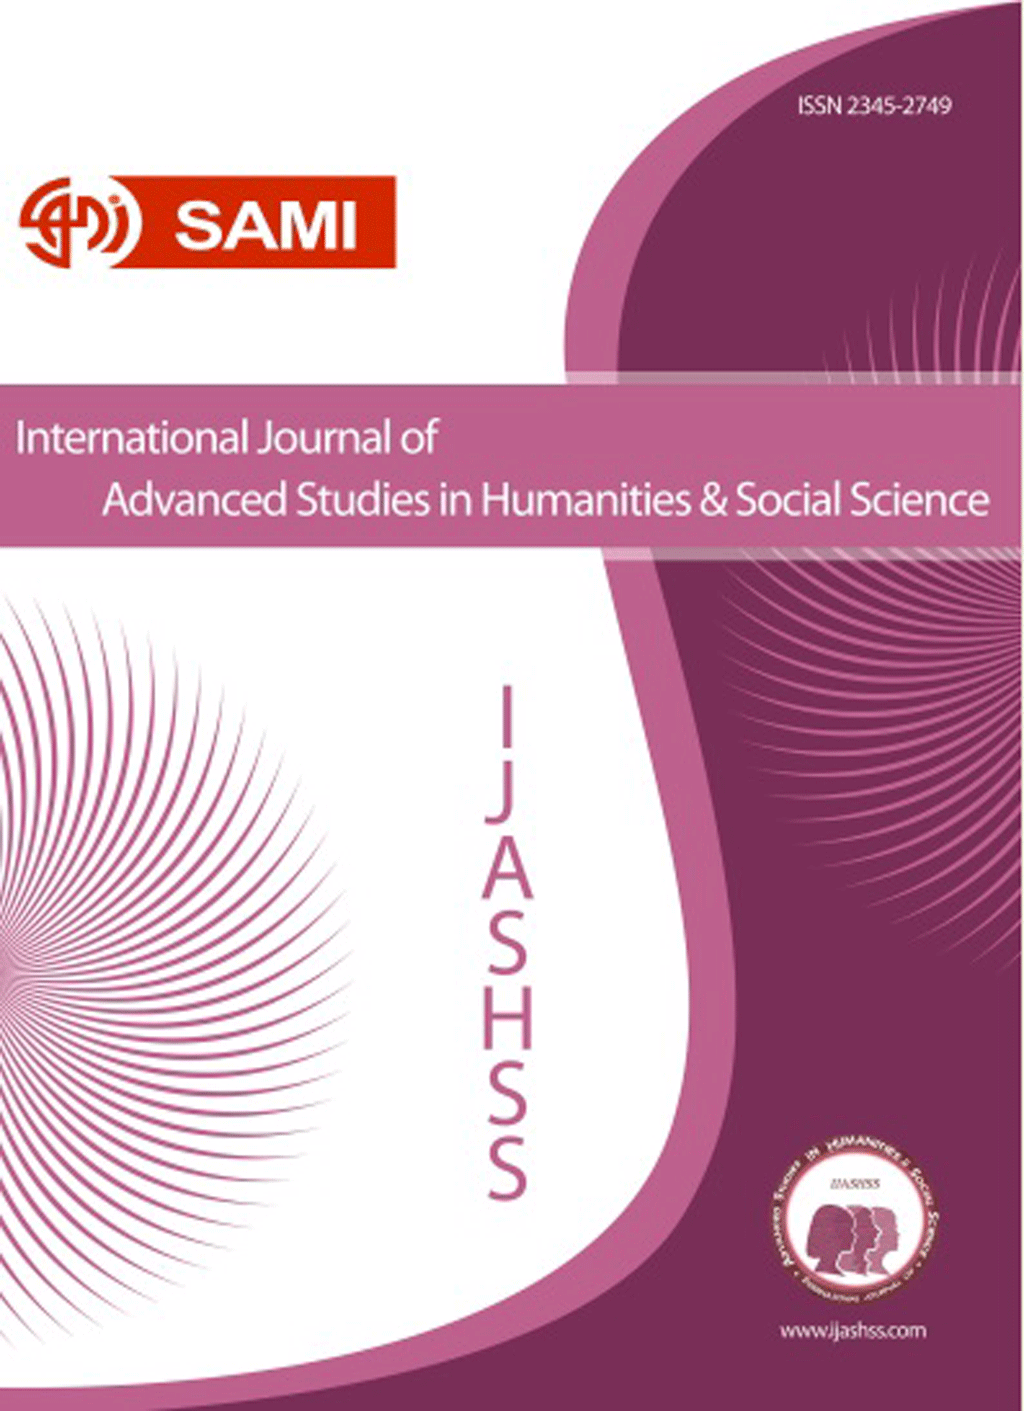 International Journal of Advanced Studies in Humanities and Social Science - October 2013, Volume 2 -  Issue 4